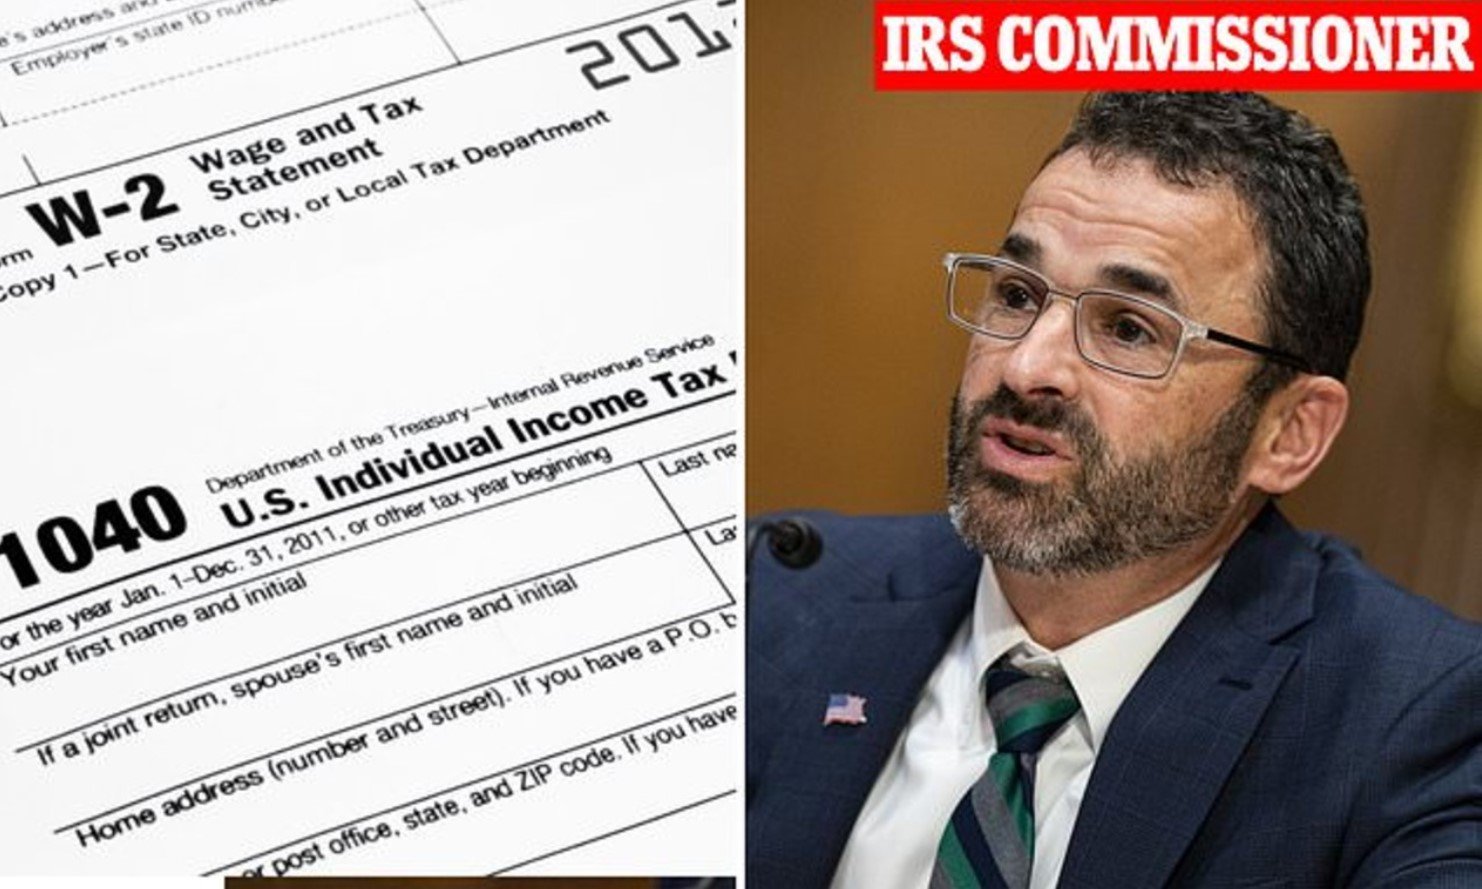 A collage of the 1040 Tax Returns Form and the IRS Commissioner